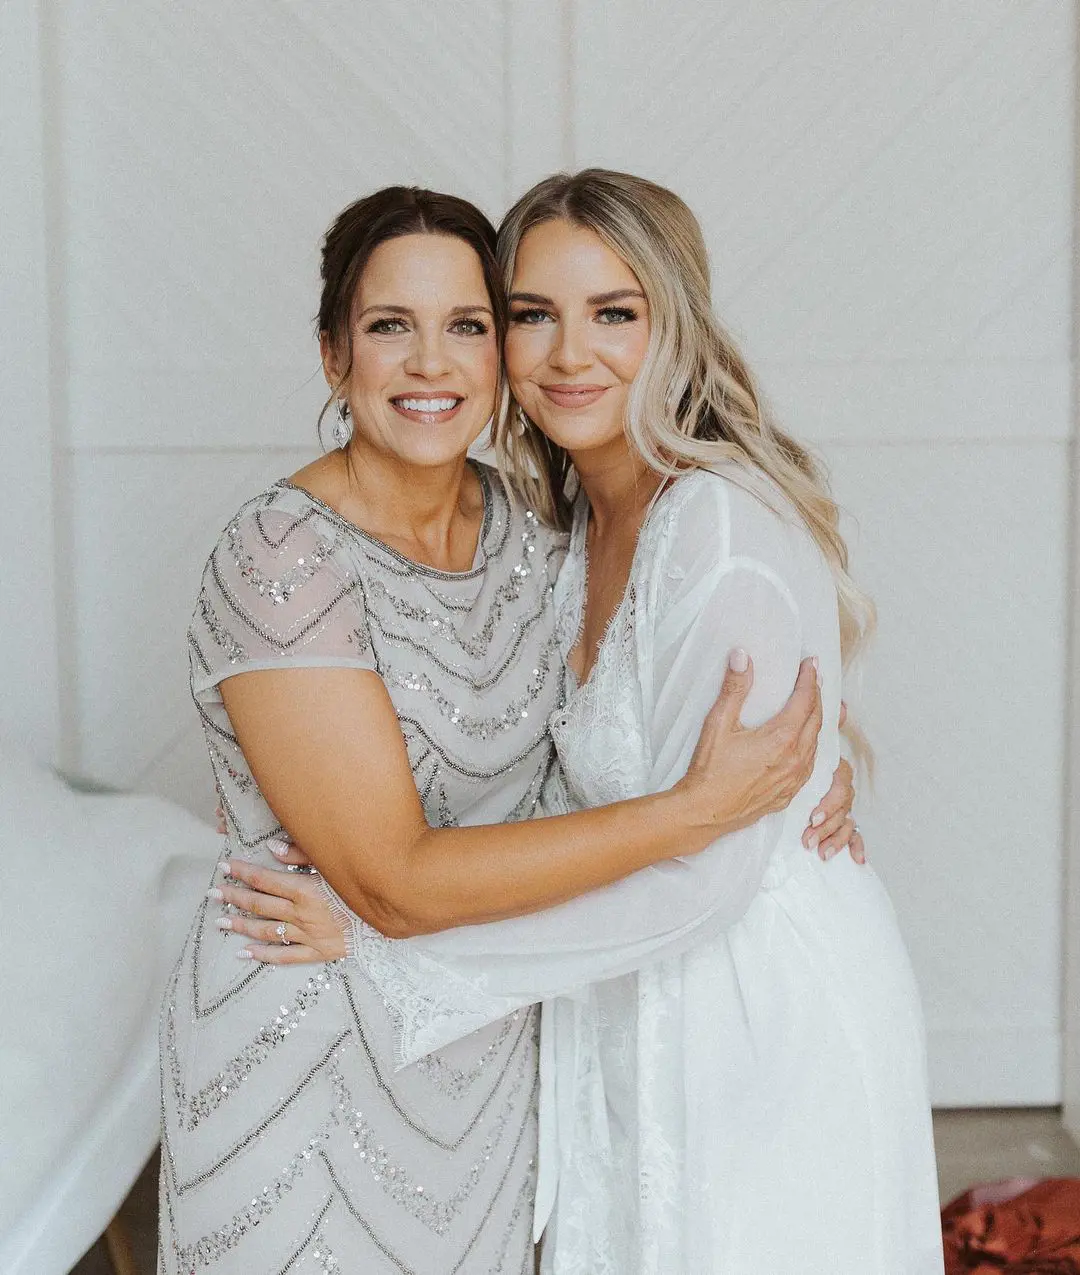 Jodi Ballard Hutto looks delighted as she hugs her daughter Mackayla on the day of her wedding 